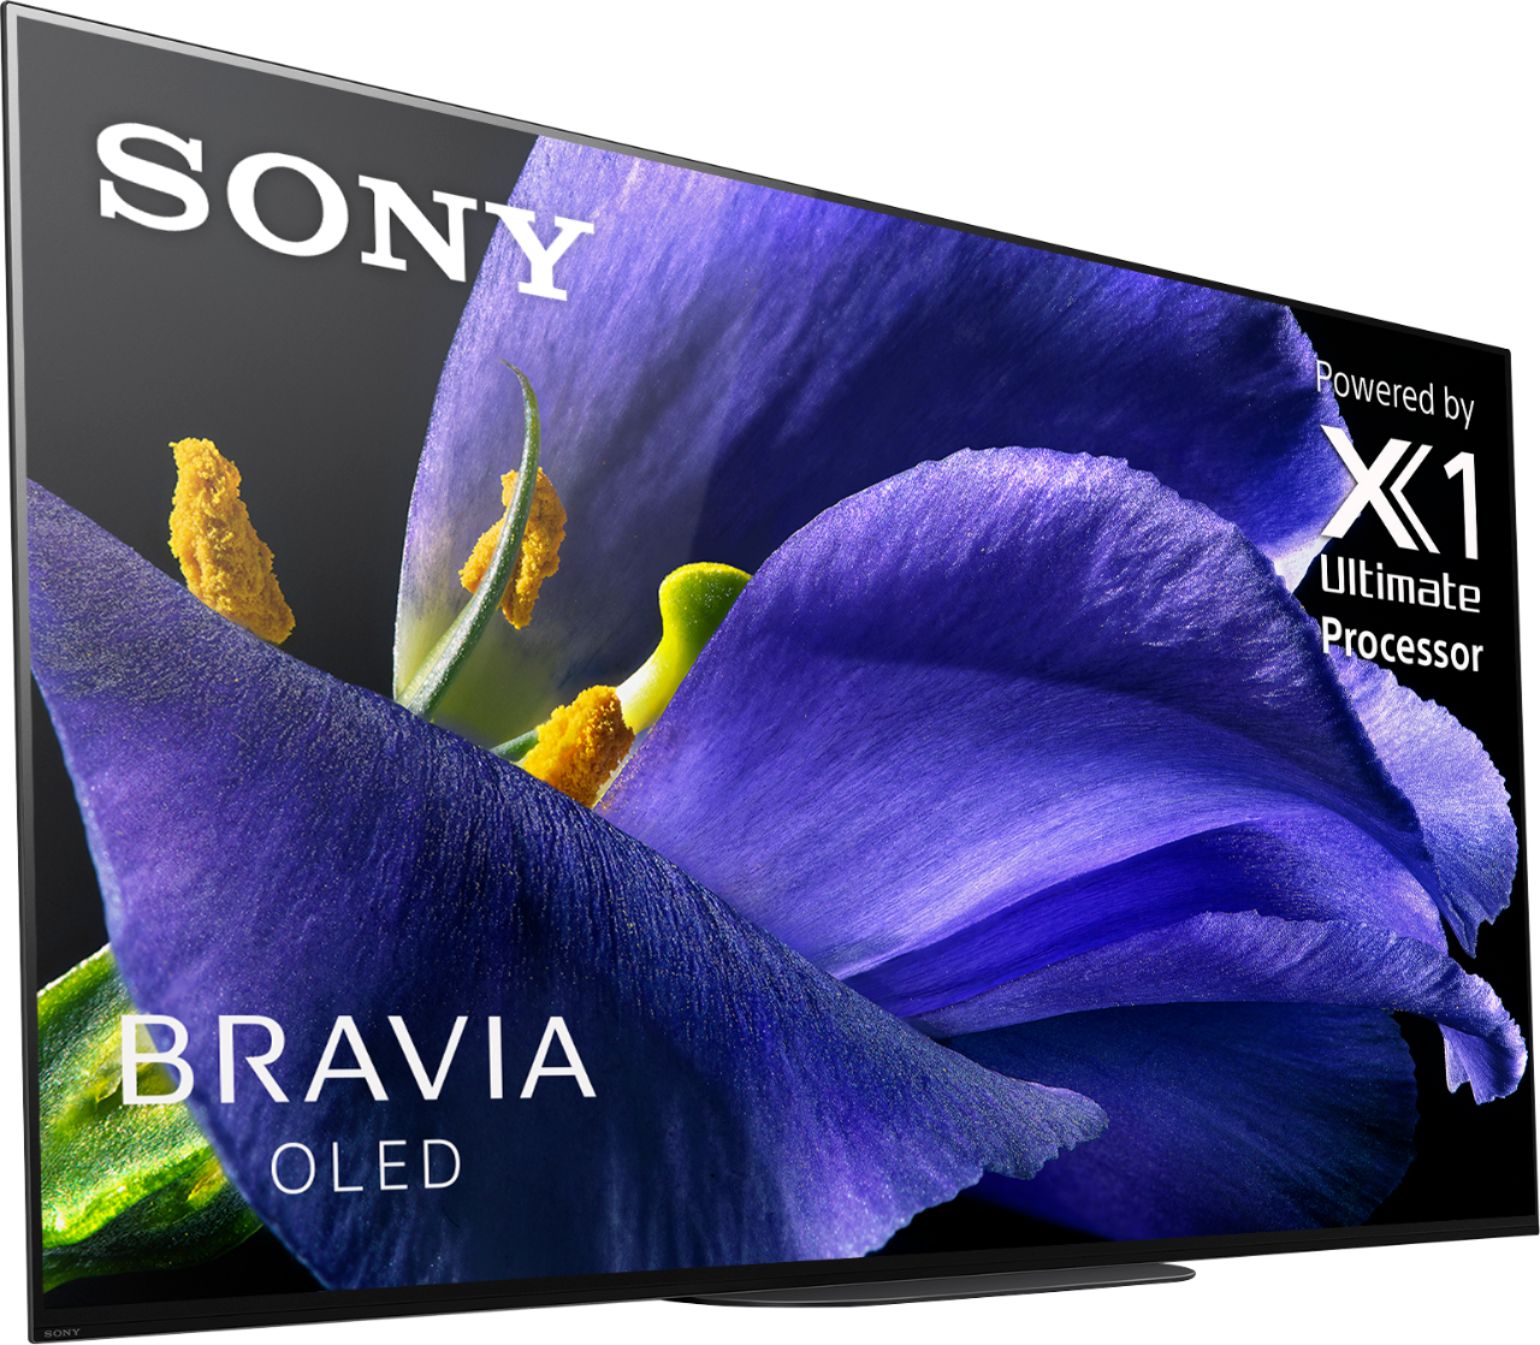 Angle View: Sony - 65" Class A9G MASTER Series OLED 4K UHD Smart Android TV